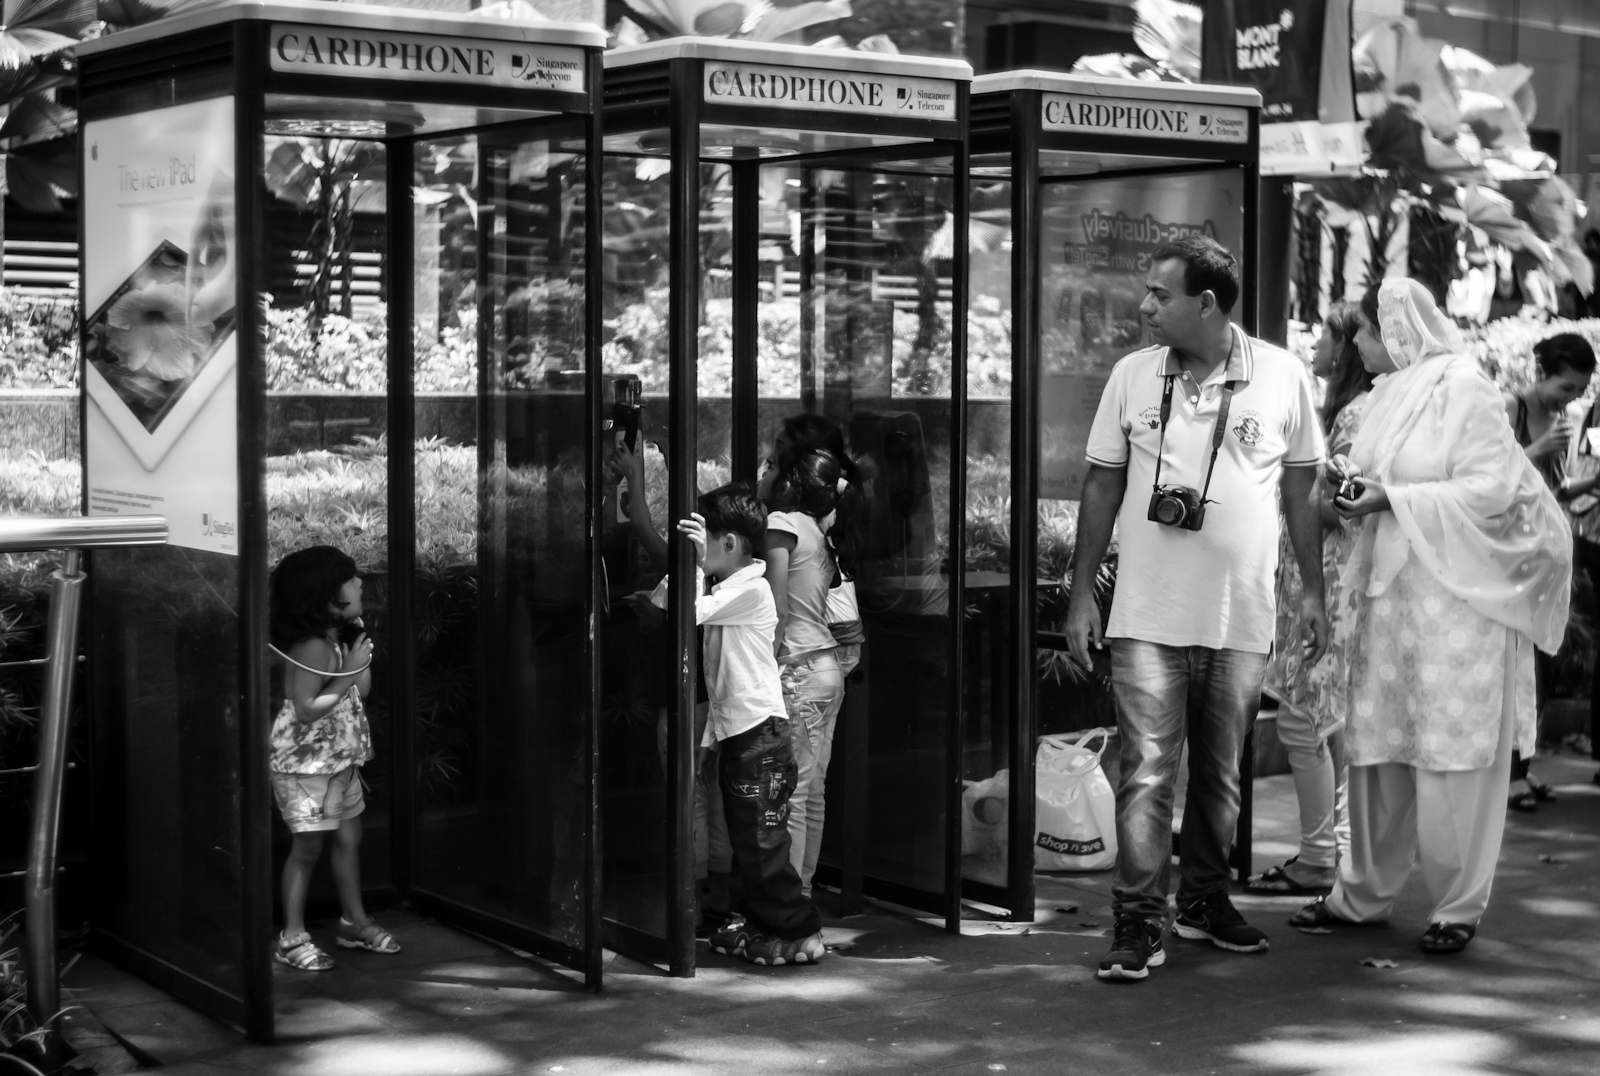 Street photography - tourist family playing with a phone booth in Orchard Road